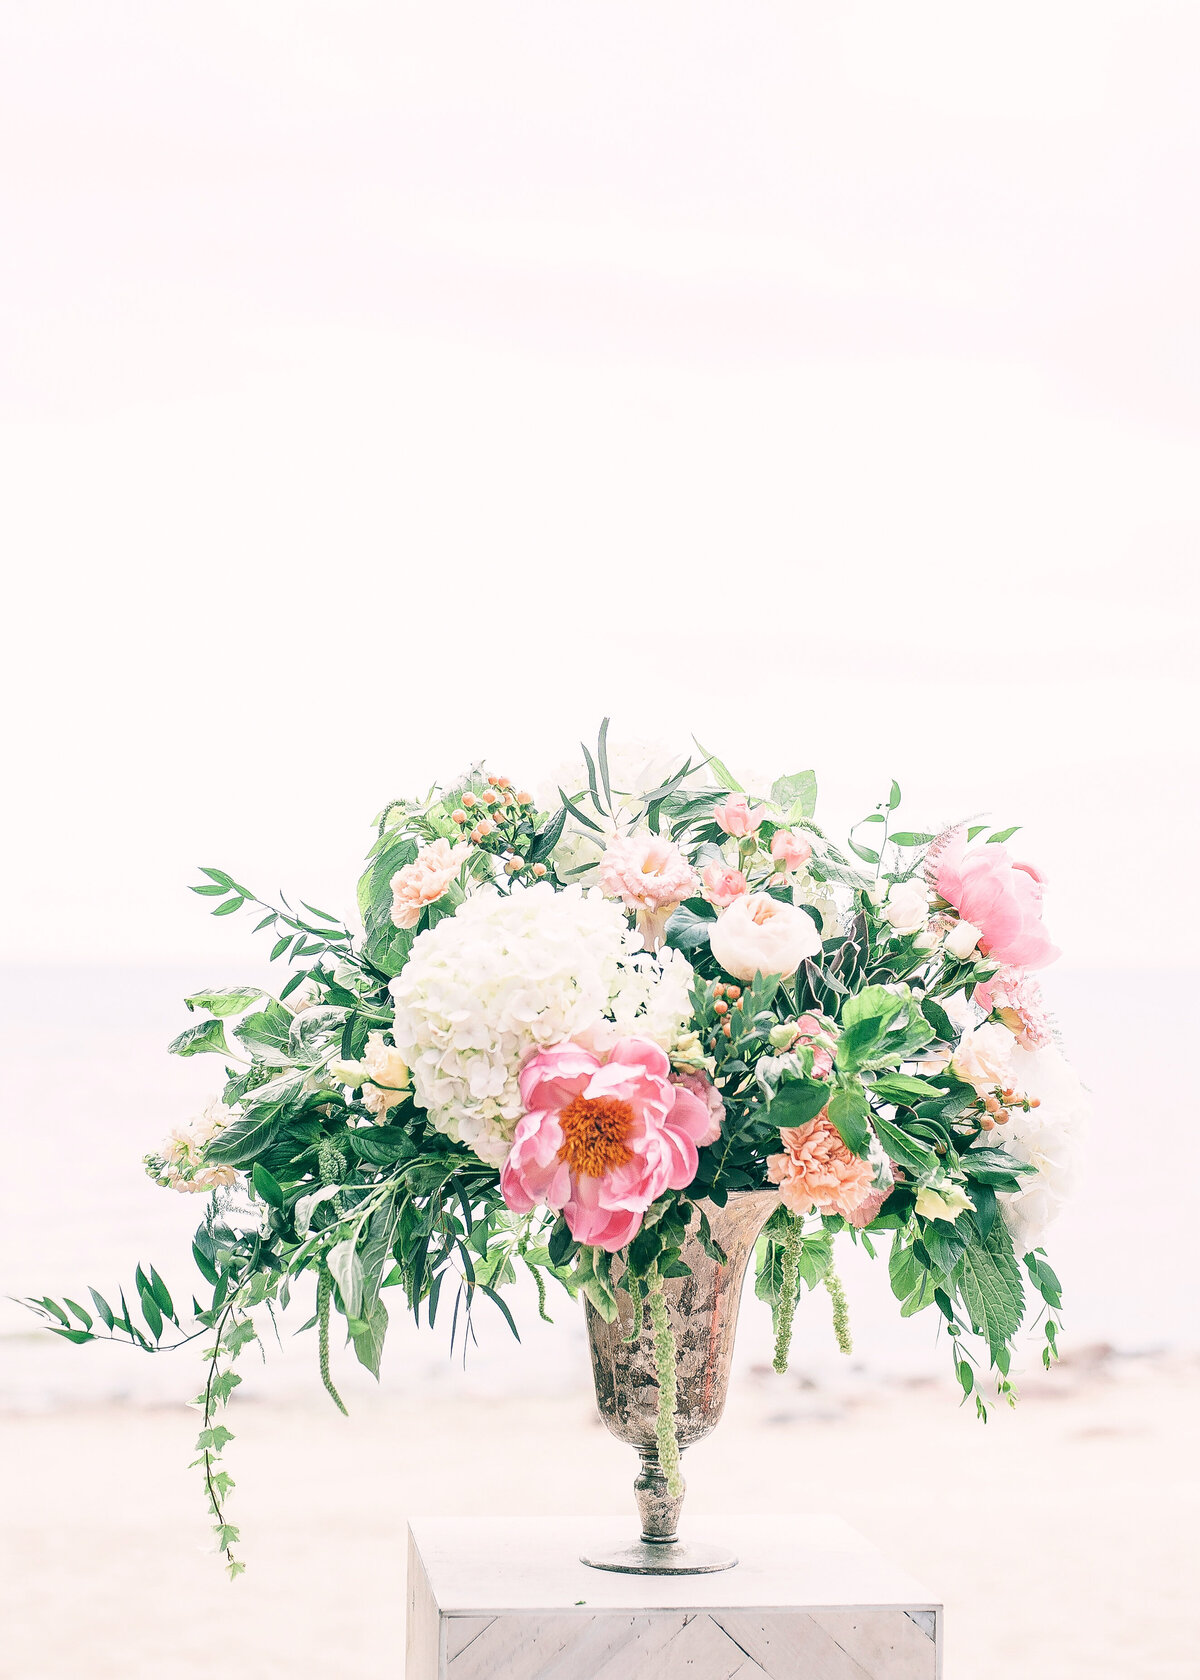 A beautiful floral centrepiece with pink peonies  and white hydrangeas fills a rustic vase on a beach. background